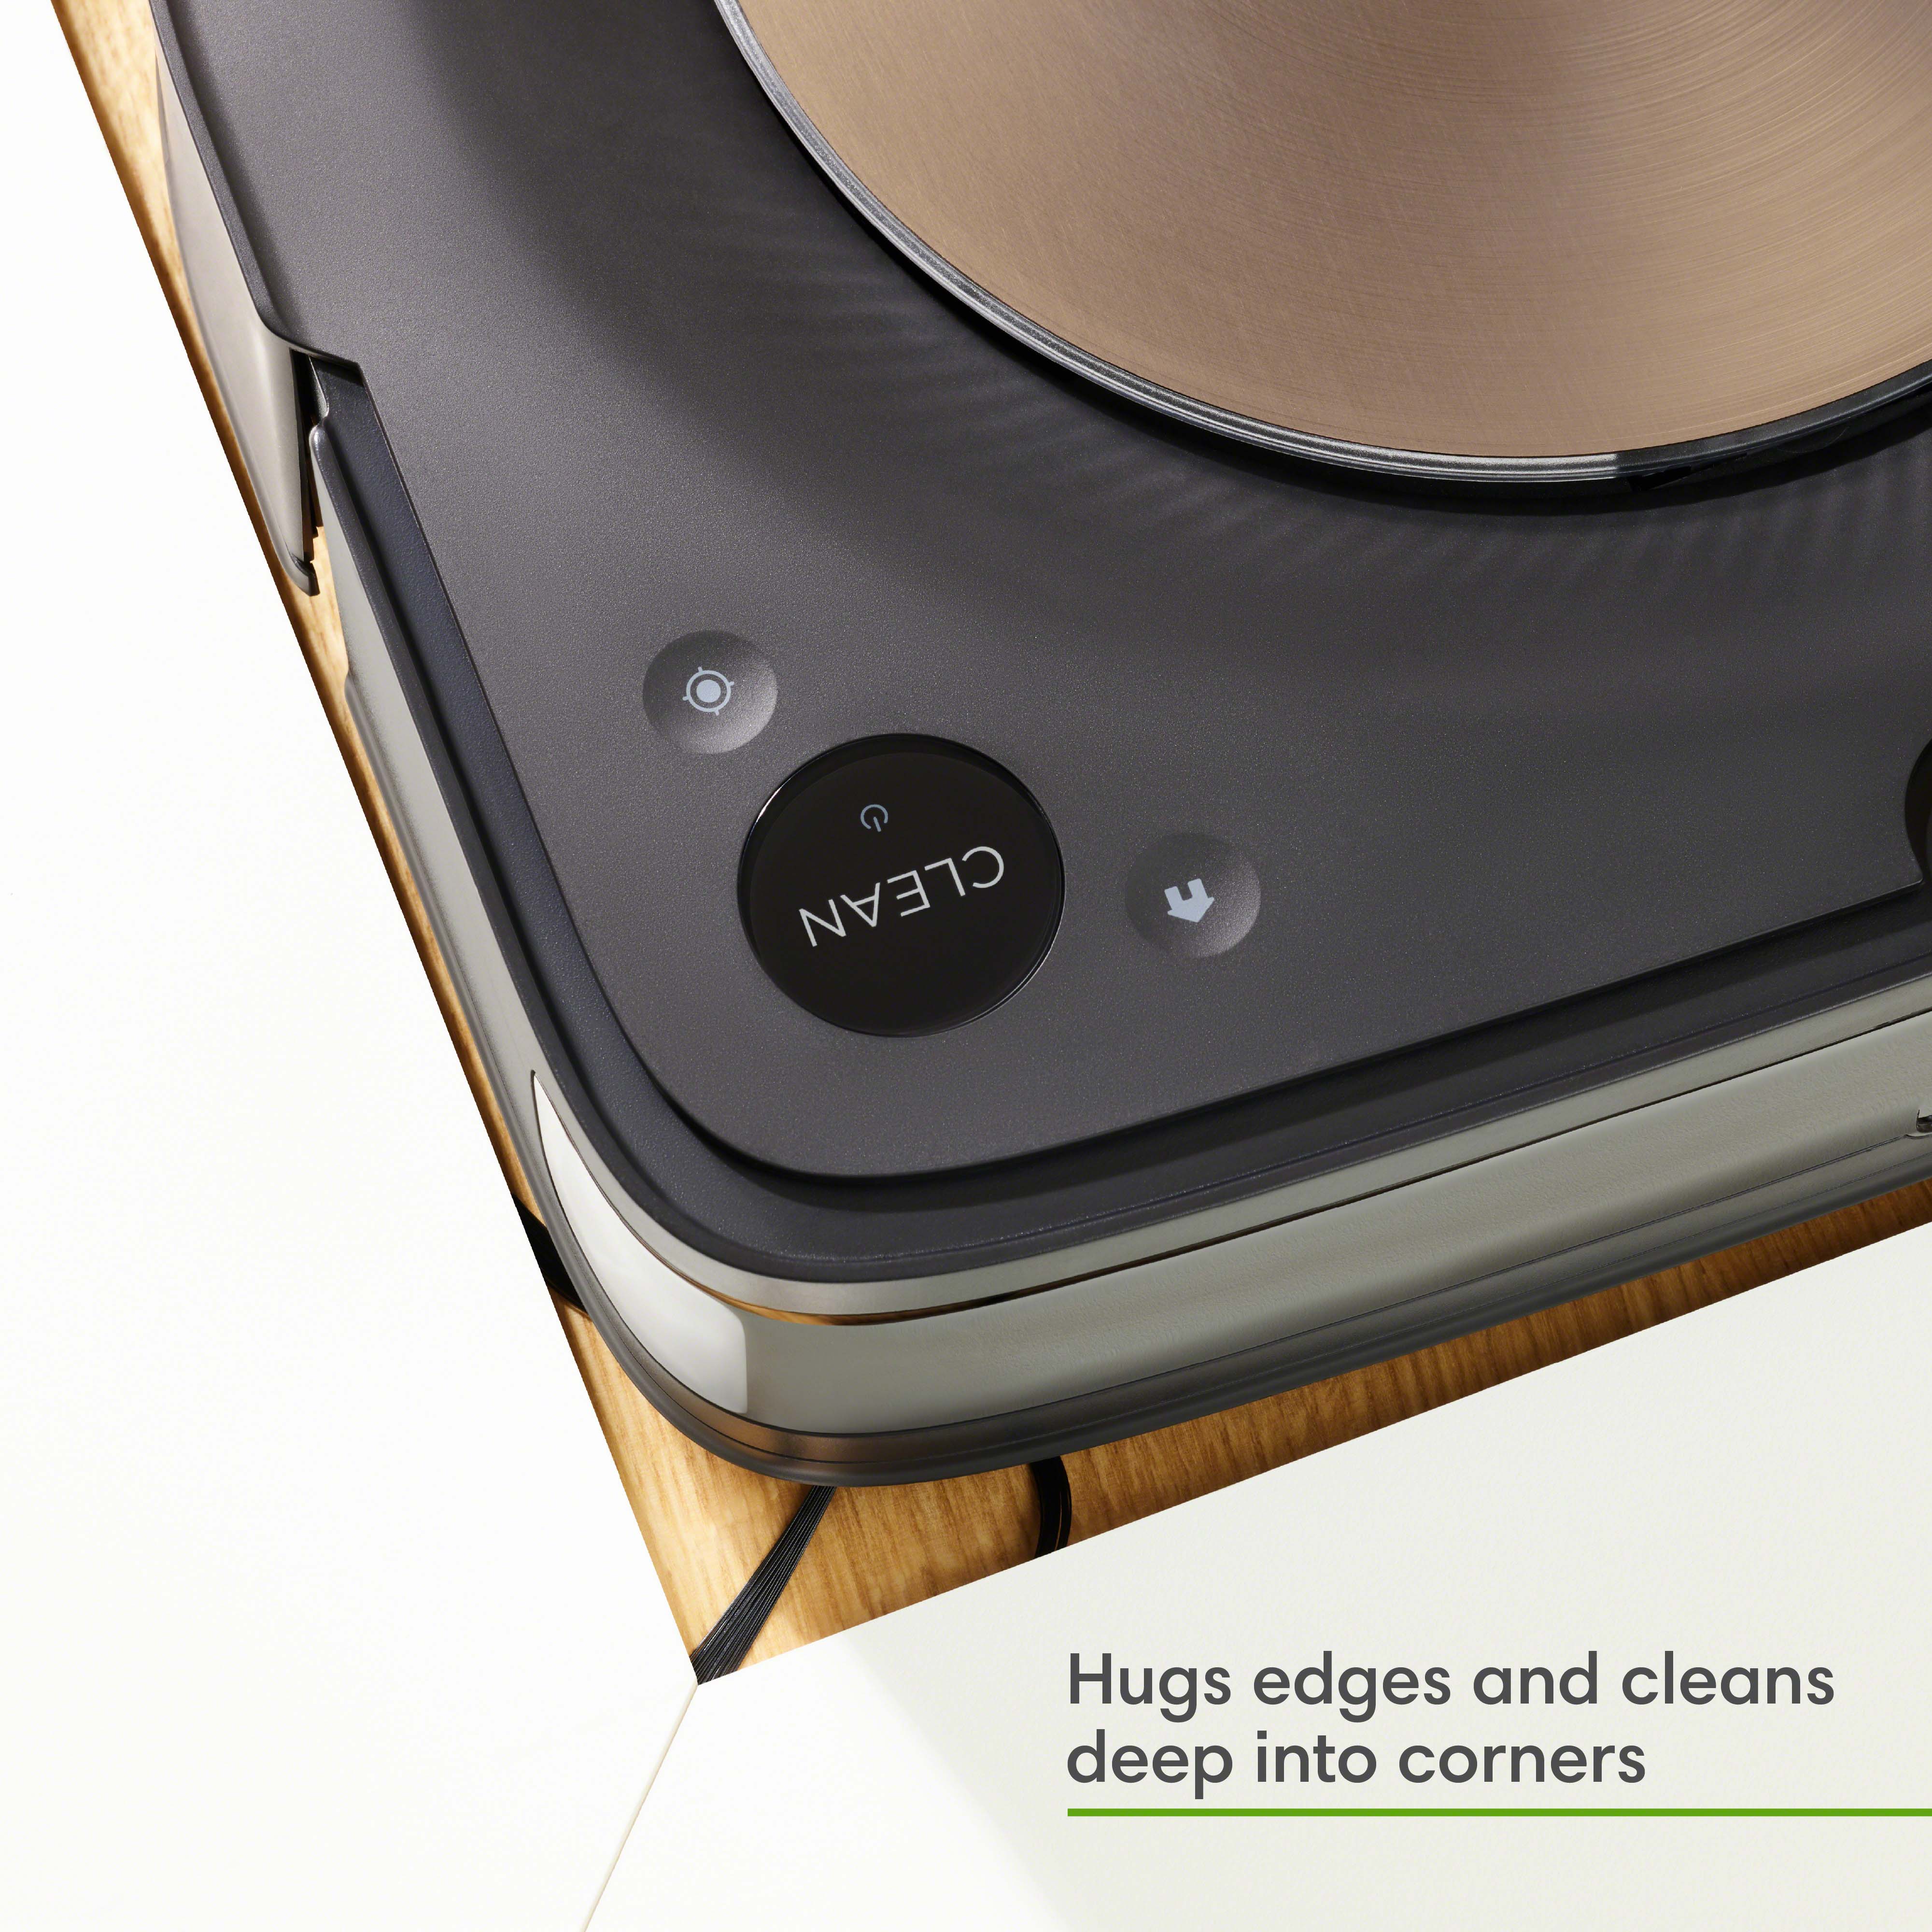 iRobot Roomba s9 (9150) Robot Vacuum- Wi-Fi Connected, Smart Mapping, Powerful Suction, Works with Google Home, Ideal for Pet Hair, Carpets, Hard Floors - image 3 of 13